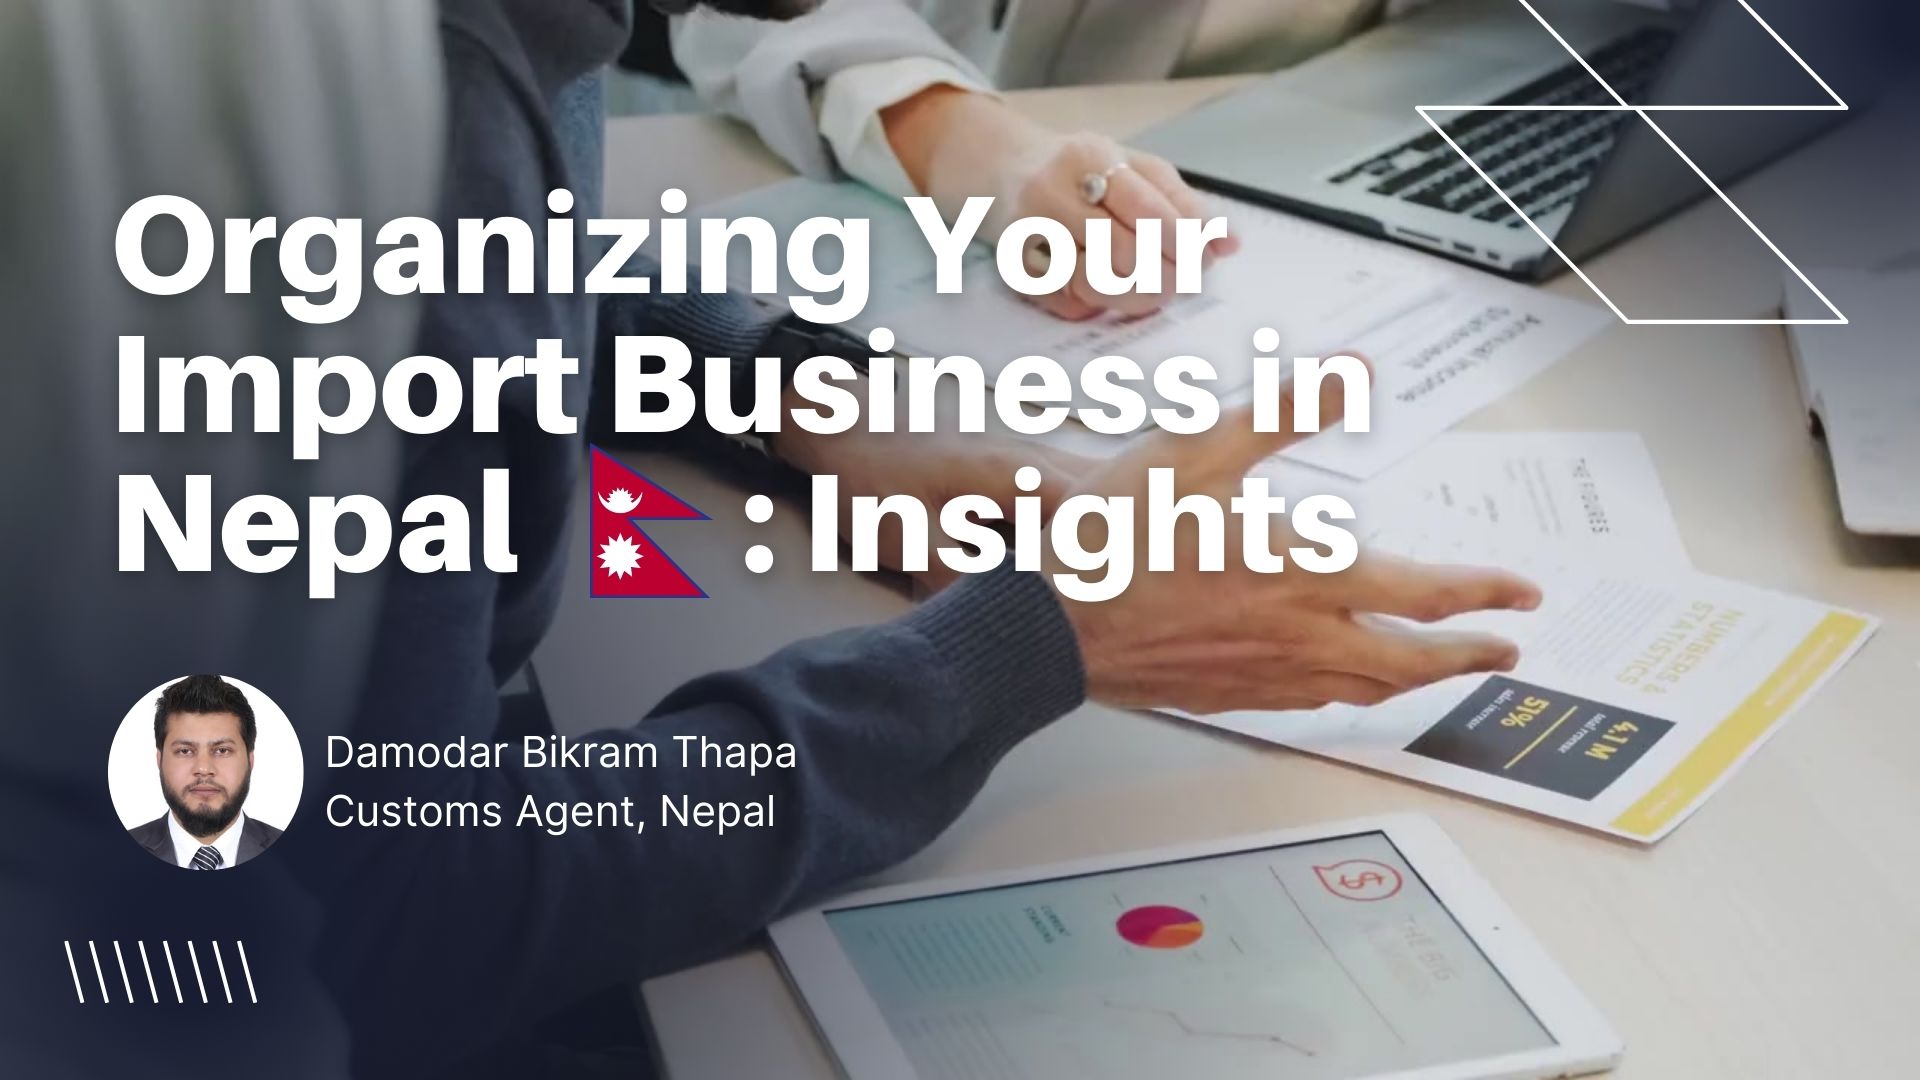 Organizing Your Import Business in Nepal: A Guide by a Customs Agent